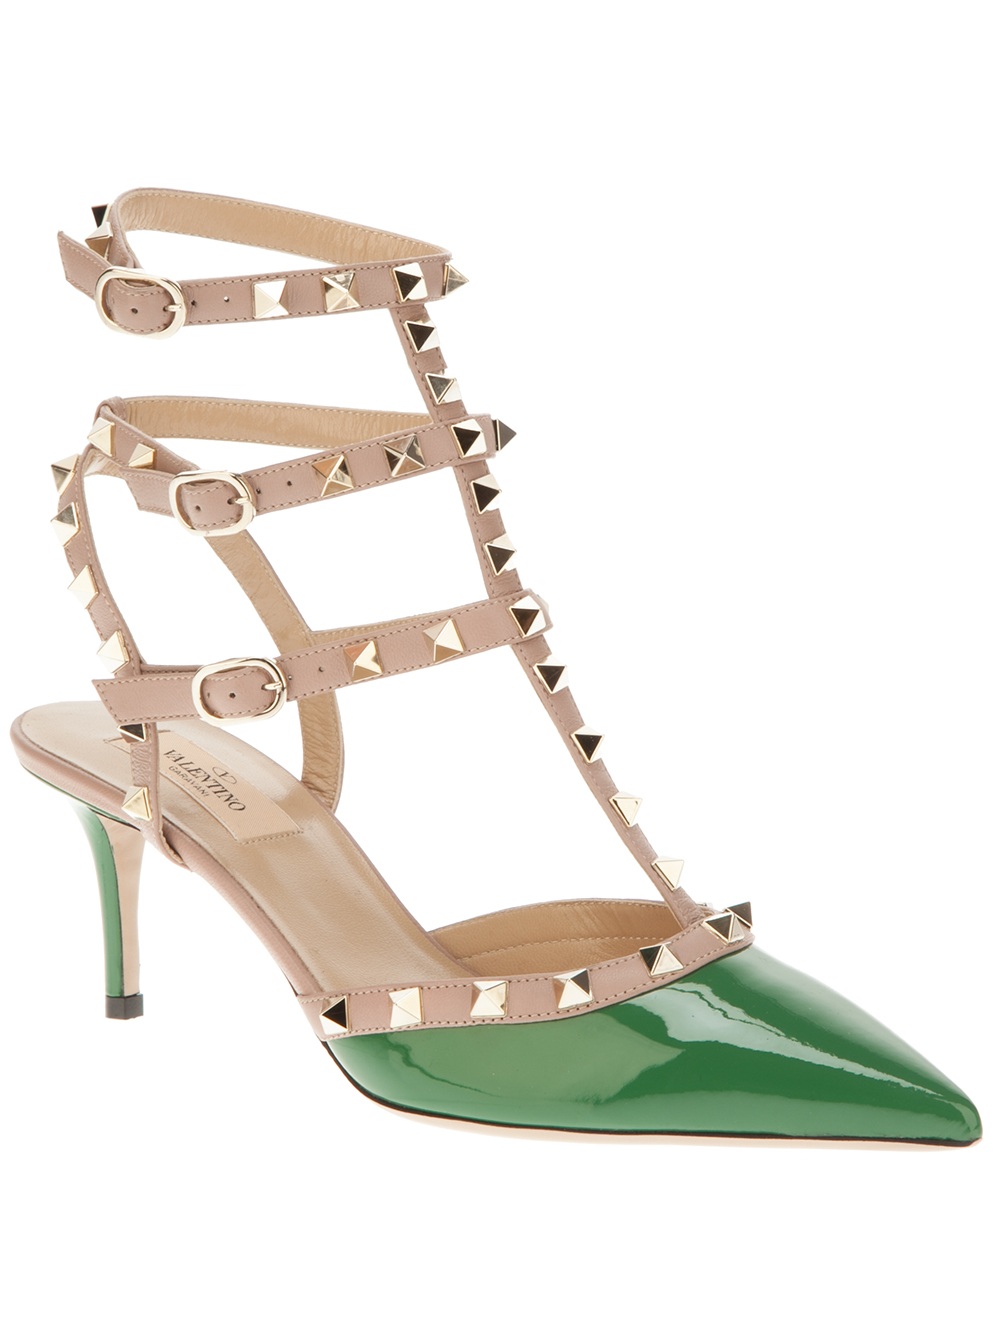 Valentino Stud Strappy Sandals in Green | Lyst